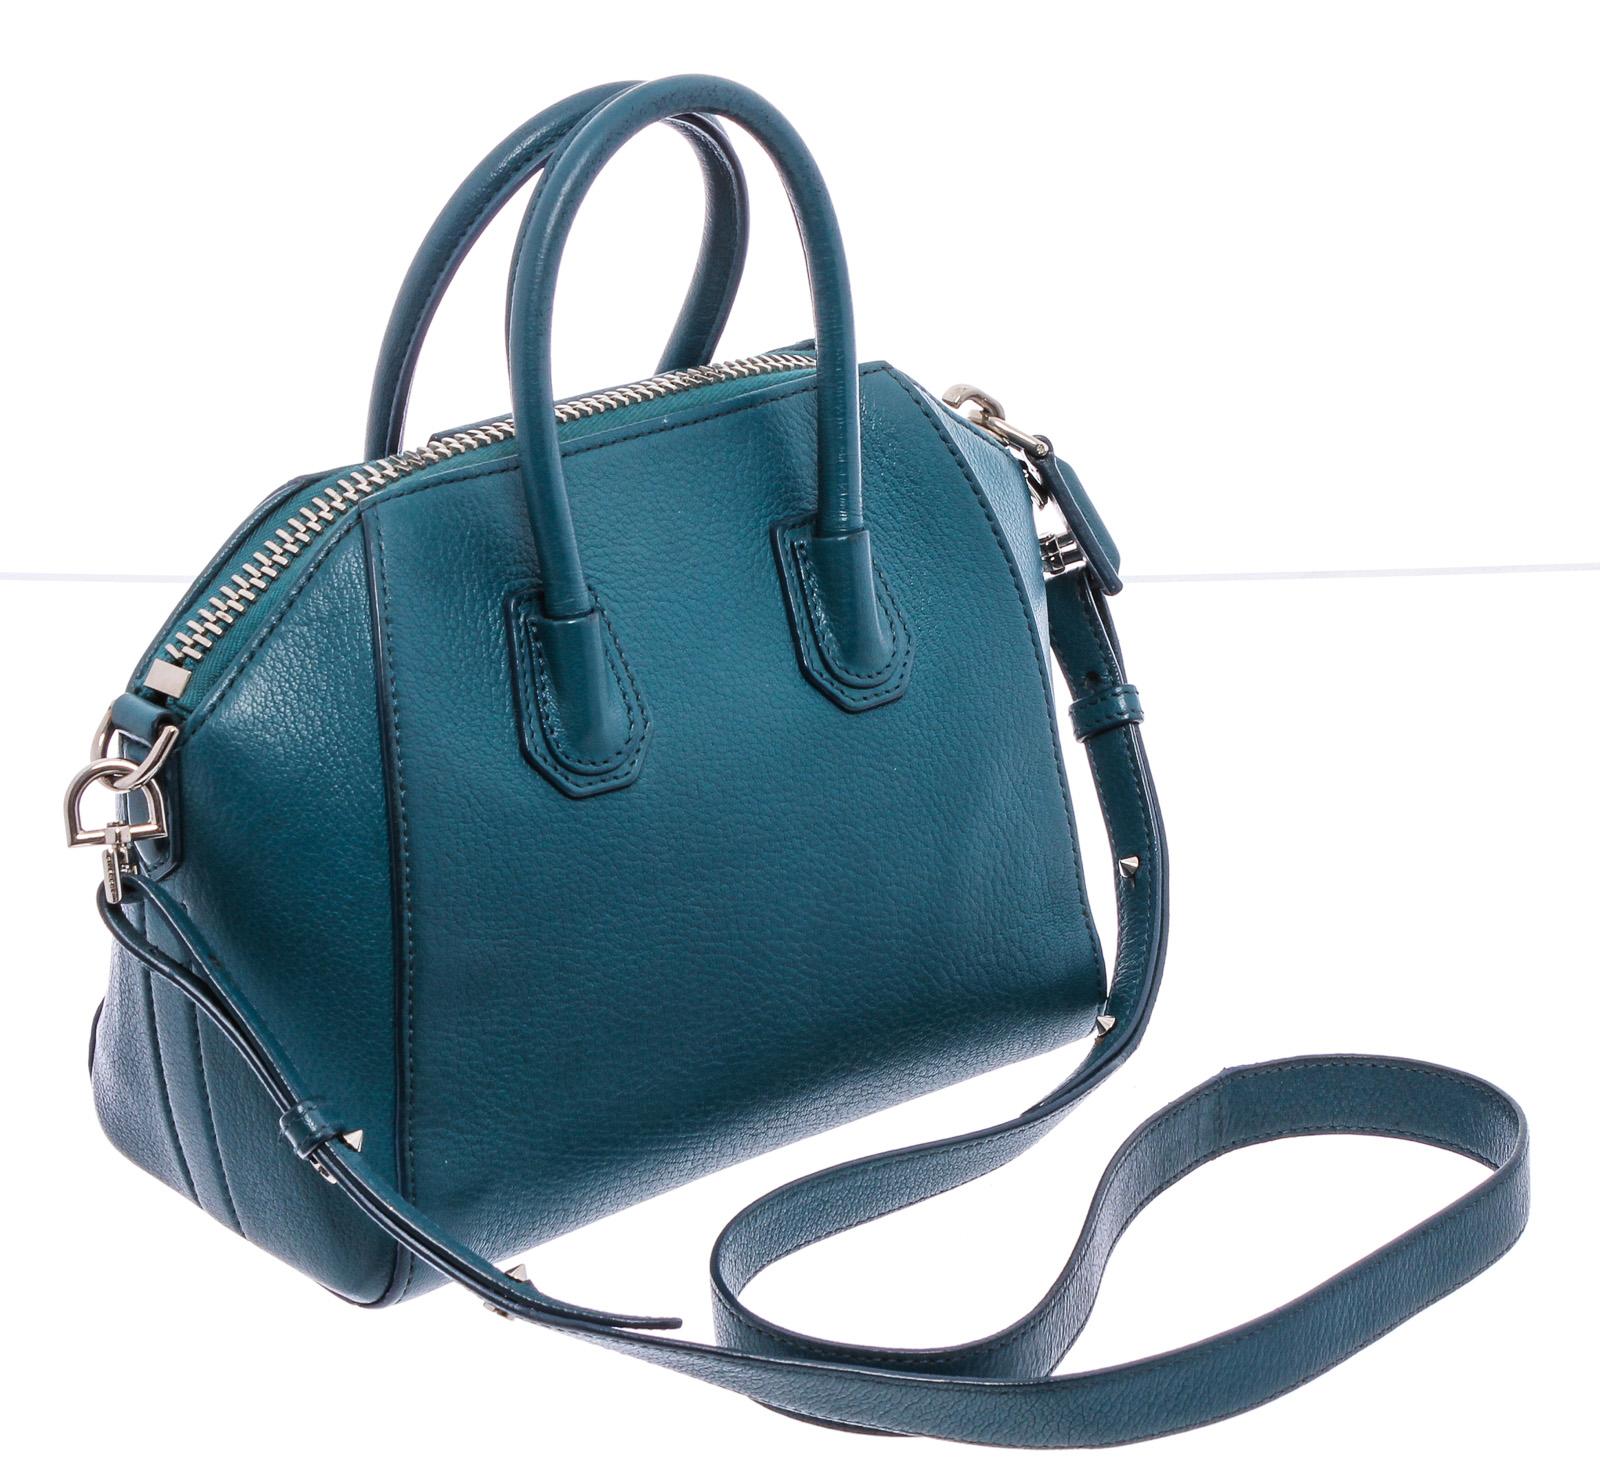 Givenchy blue grained leather Mini Antigona bag with silver-tone hardware, beige canvas lining, two interior slip pockets, interior zip pocket, optional leather crossbody shoulder strap, and zip top closure.

20359MSC 